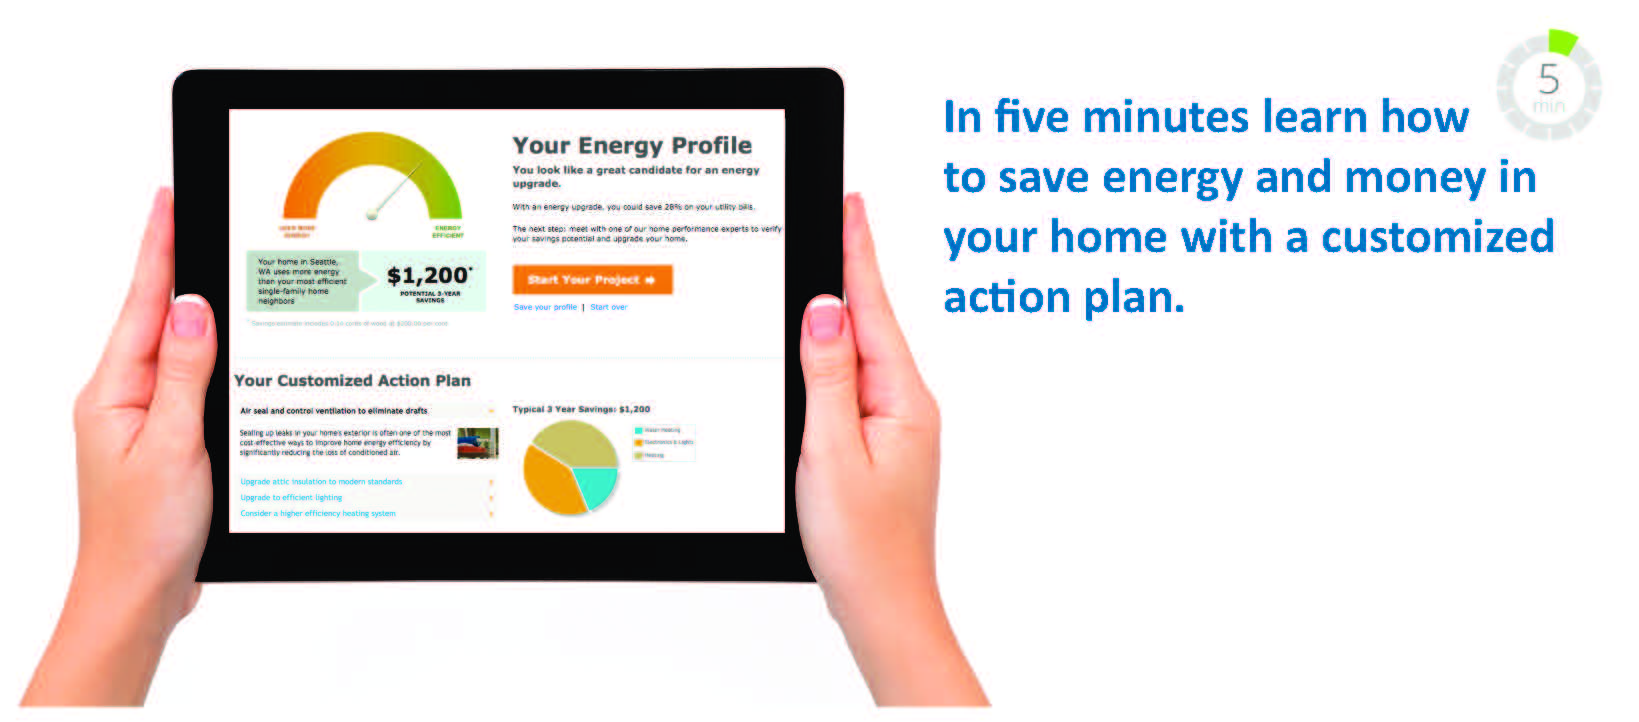 Learn how to save energy and money in your home in five minutes with a customized action plan